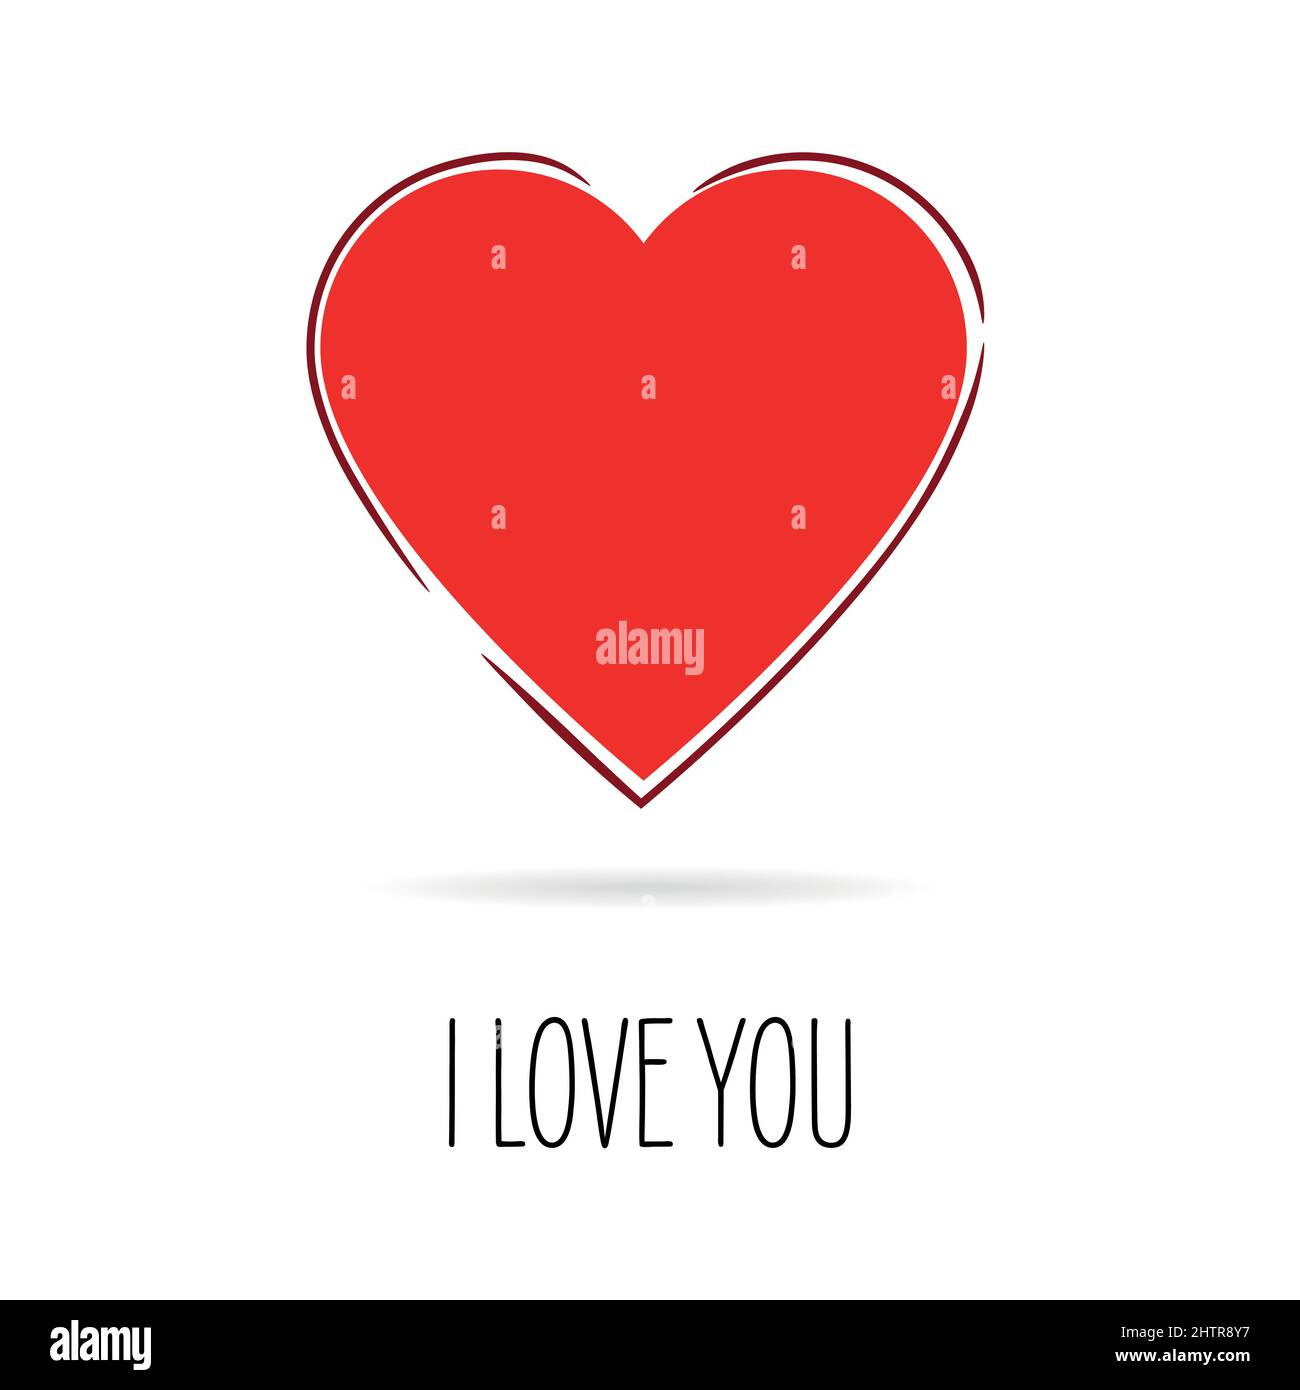 I love you - Heart Icon with shadow and text on a white background Stock Vector